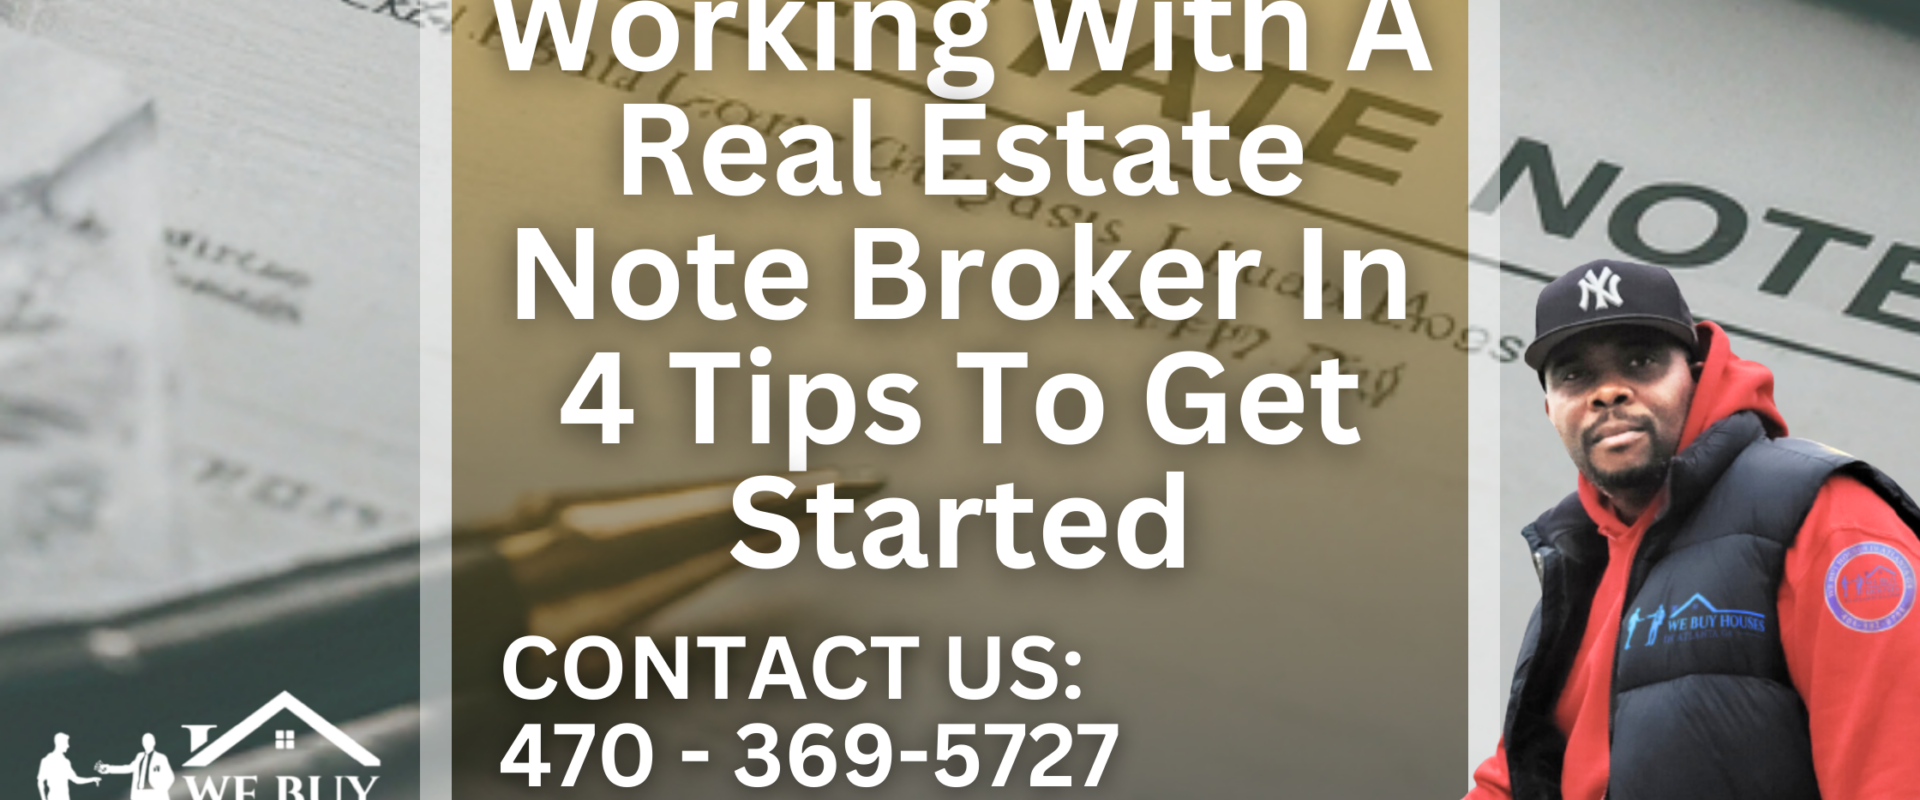 Working With A Real Estate Note Broker In 4 Tips To Get Started